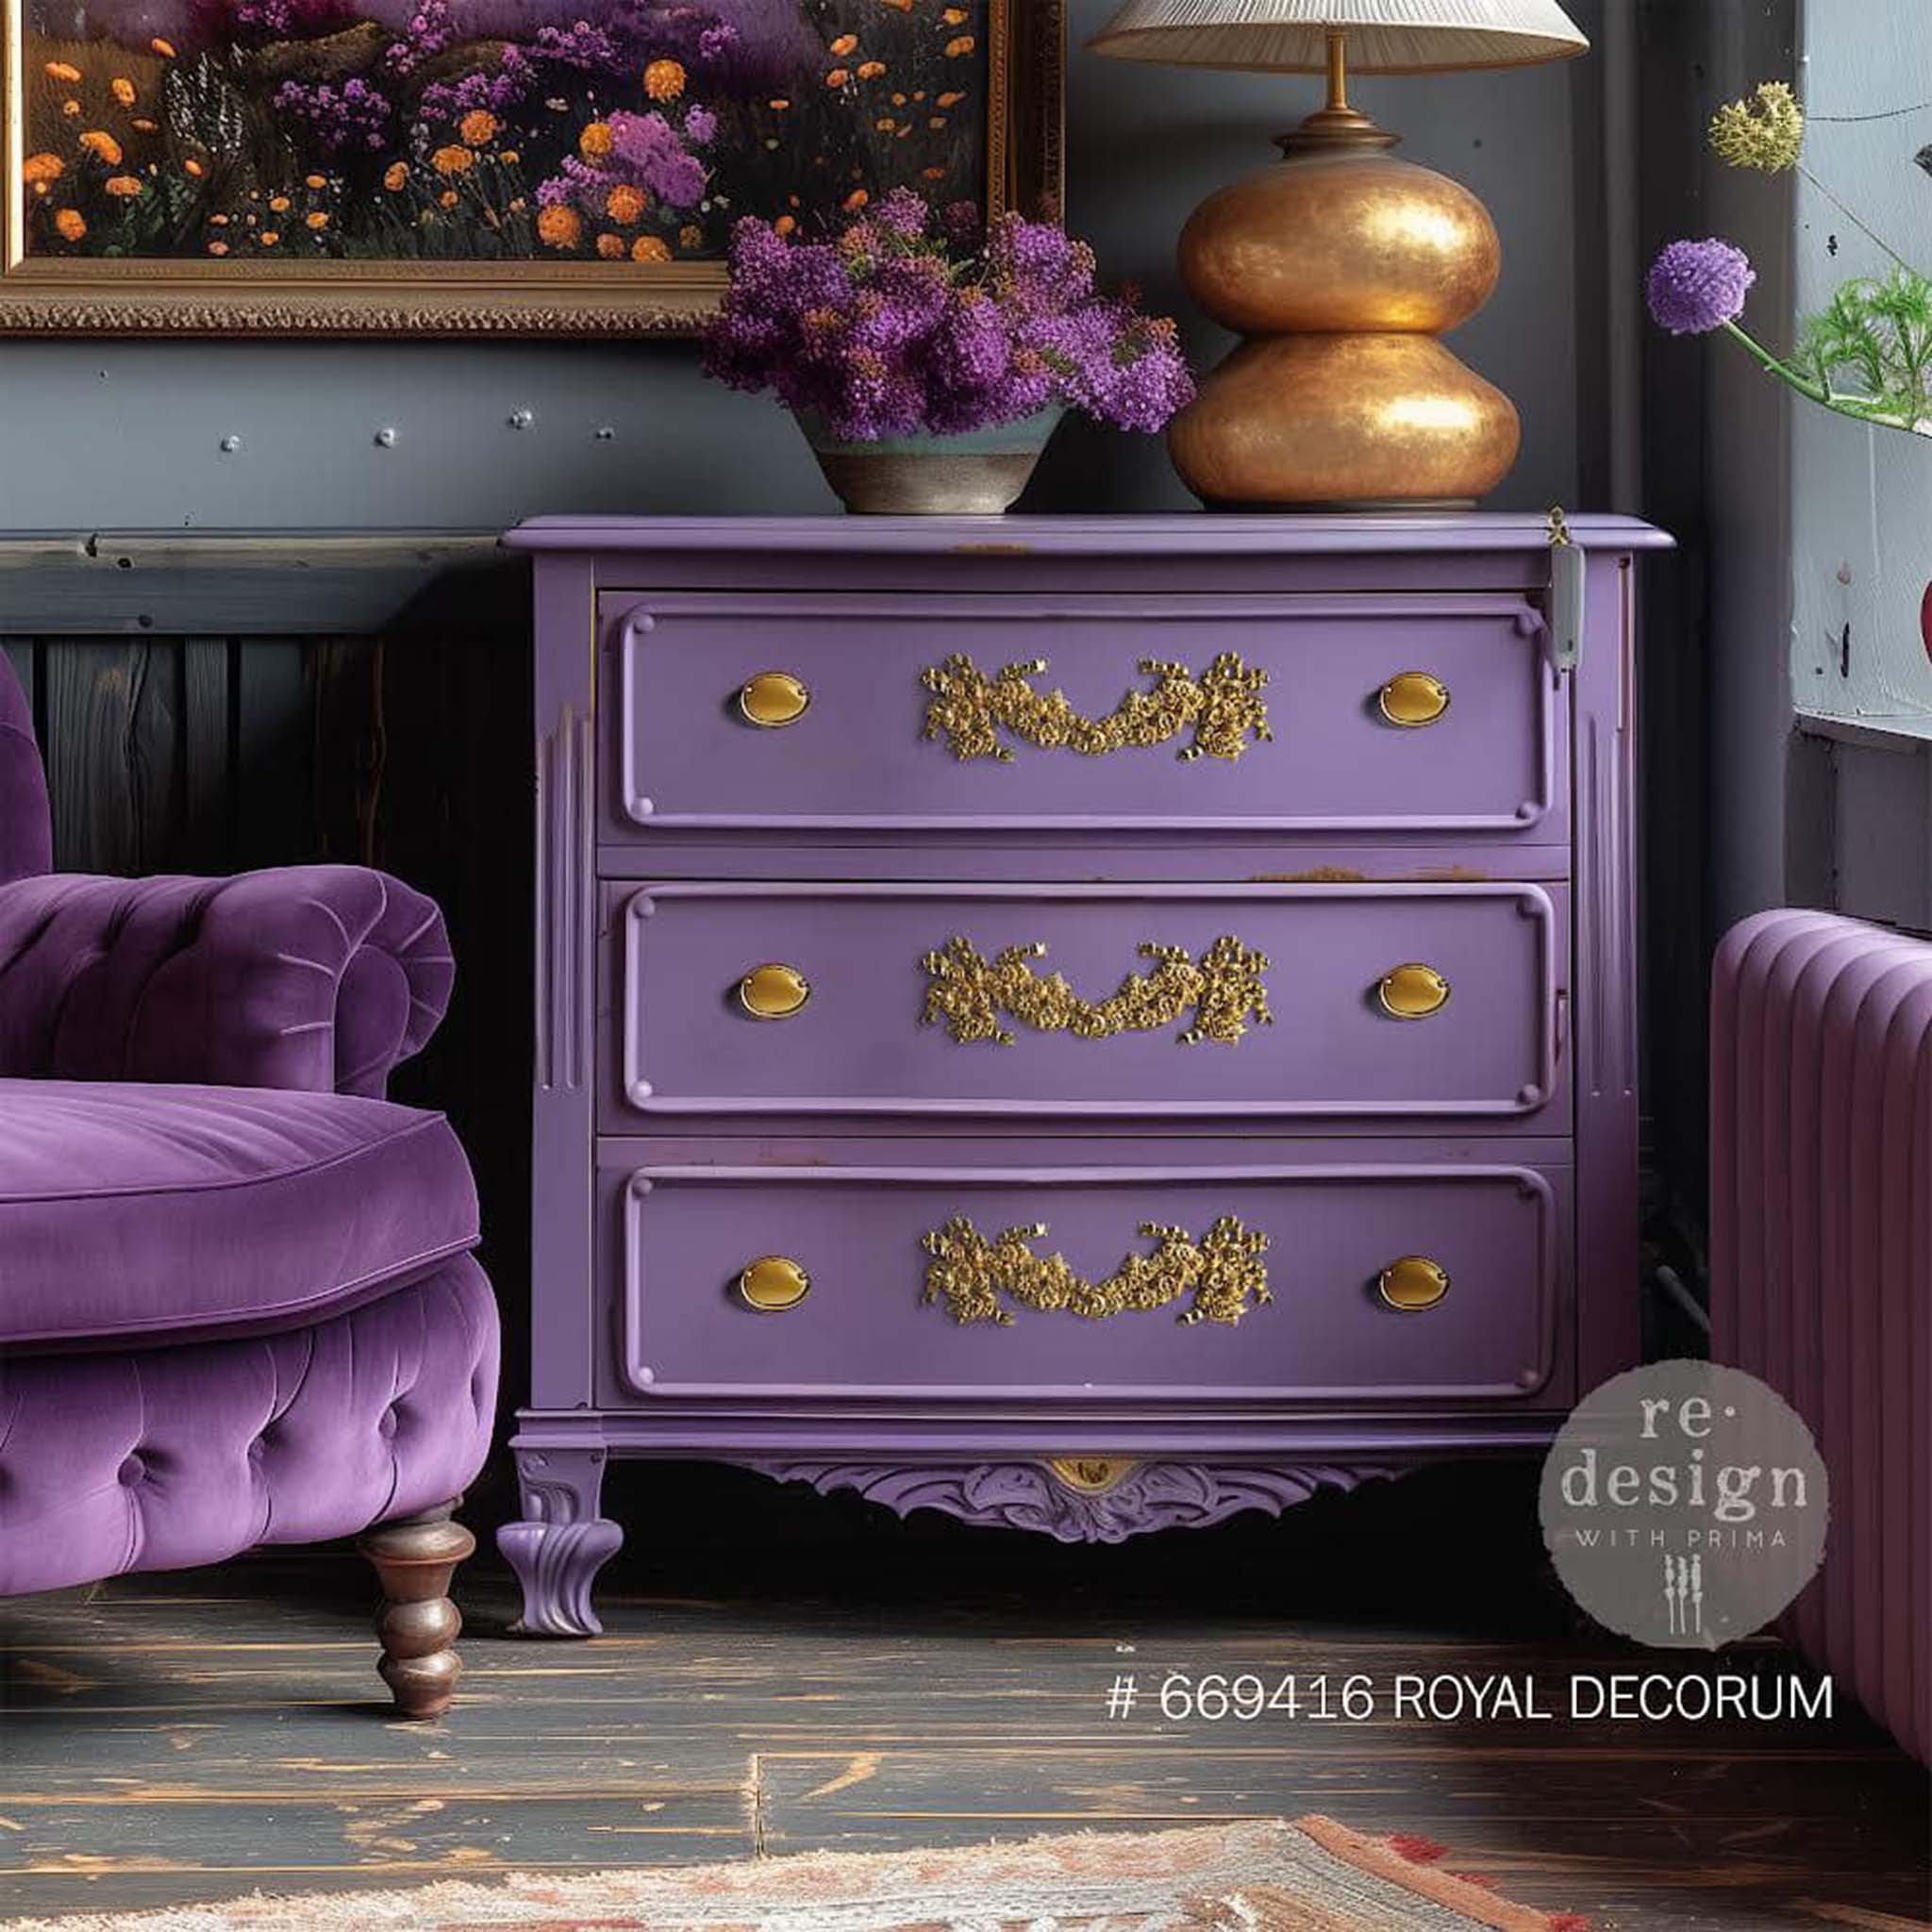 A vintage 3-drawer dresser is painted lavender with gold accents and features ReDesign with Prima's Royal Decor Poly Casting in the center of the drawers.